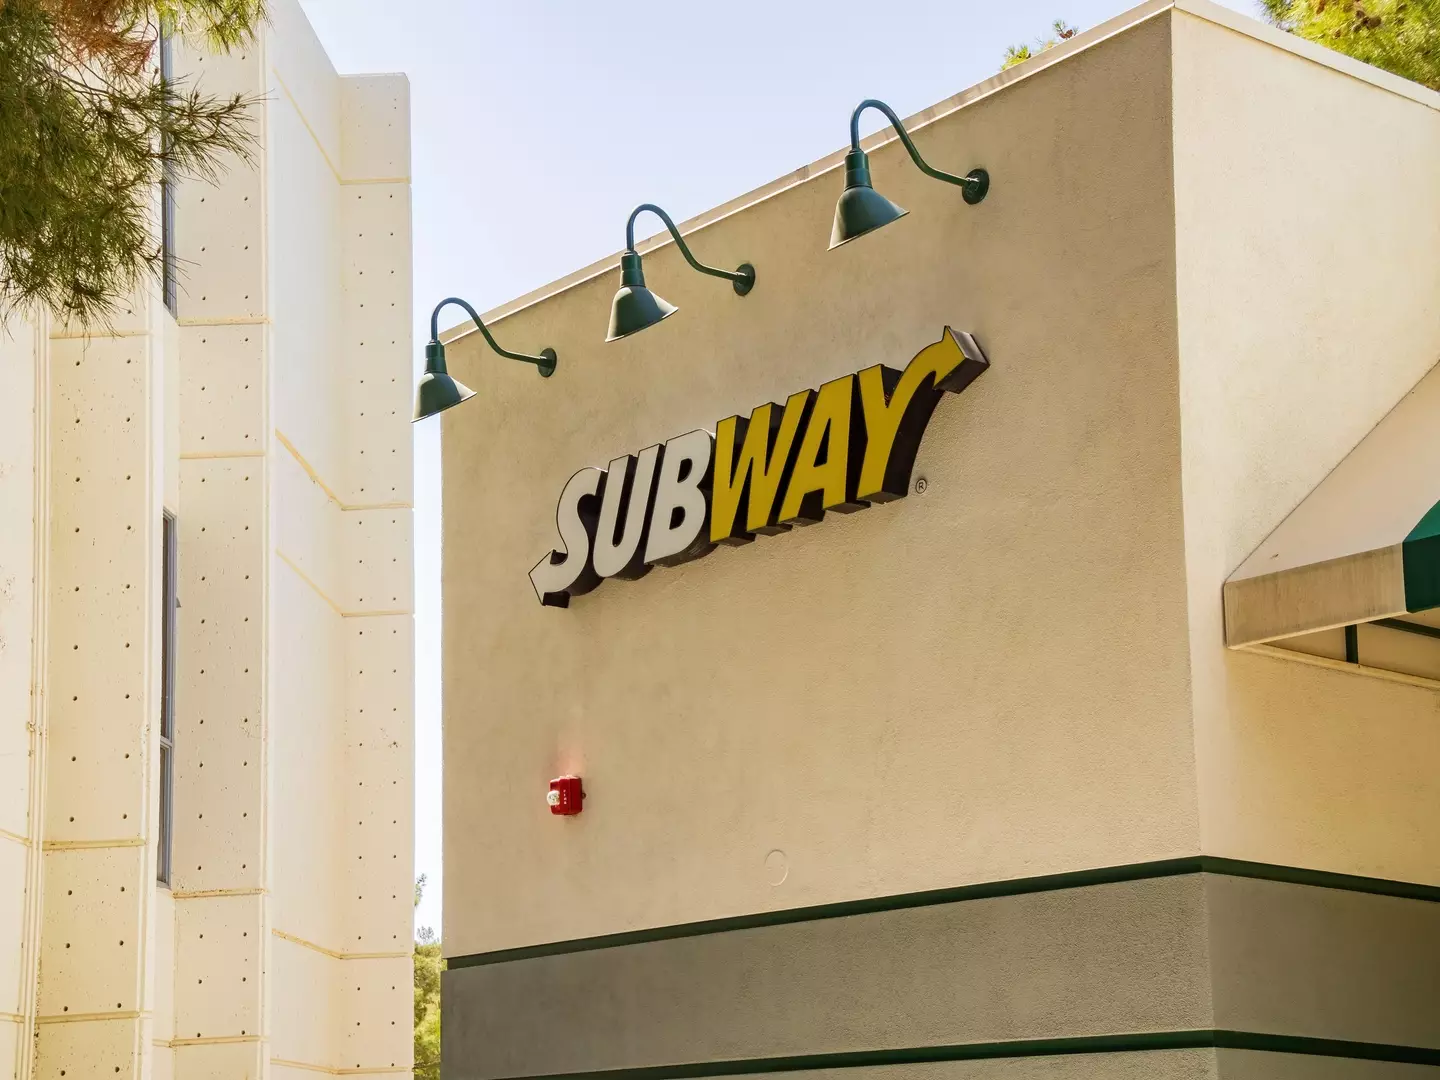 Subway is offering free sandwiches for life to anyone who gets a footlong ink.